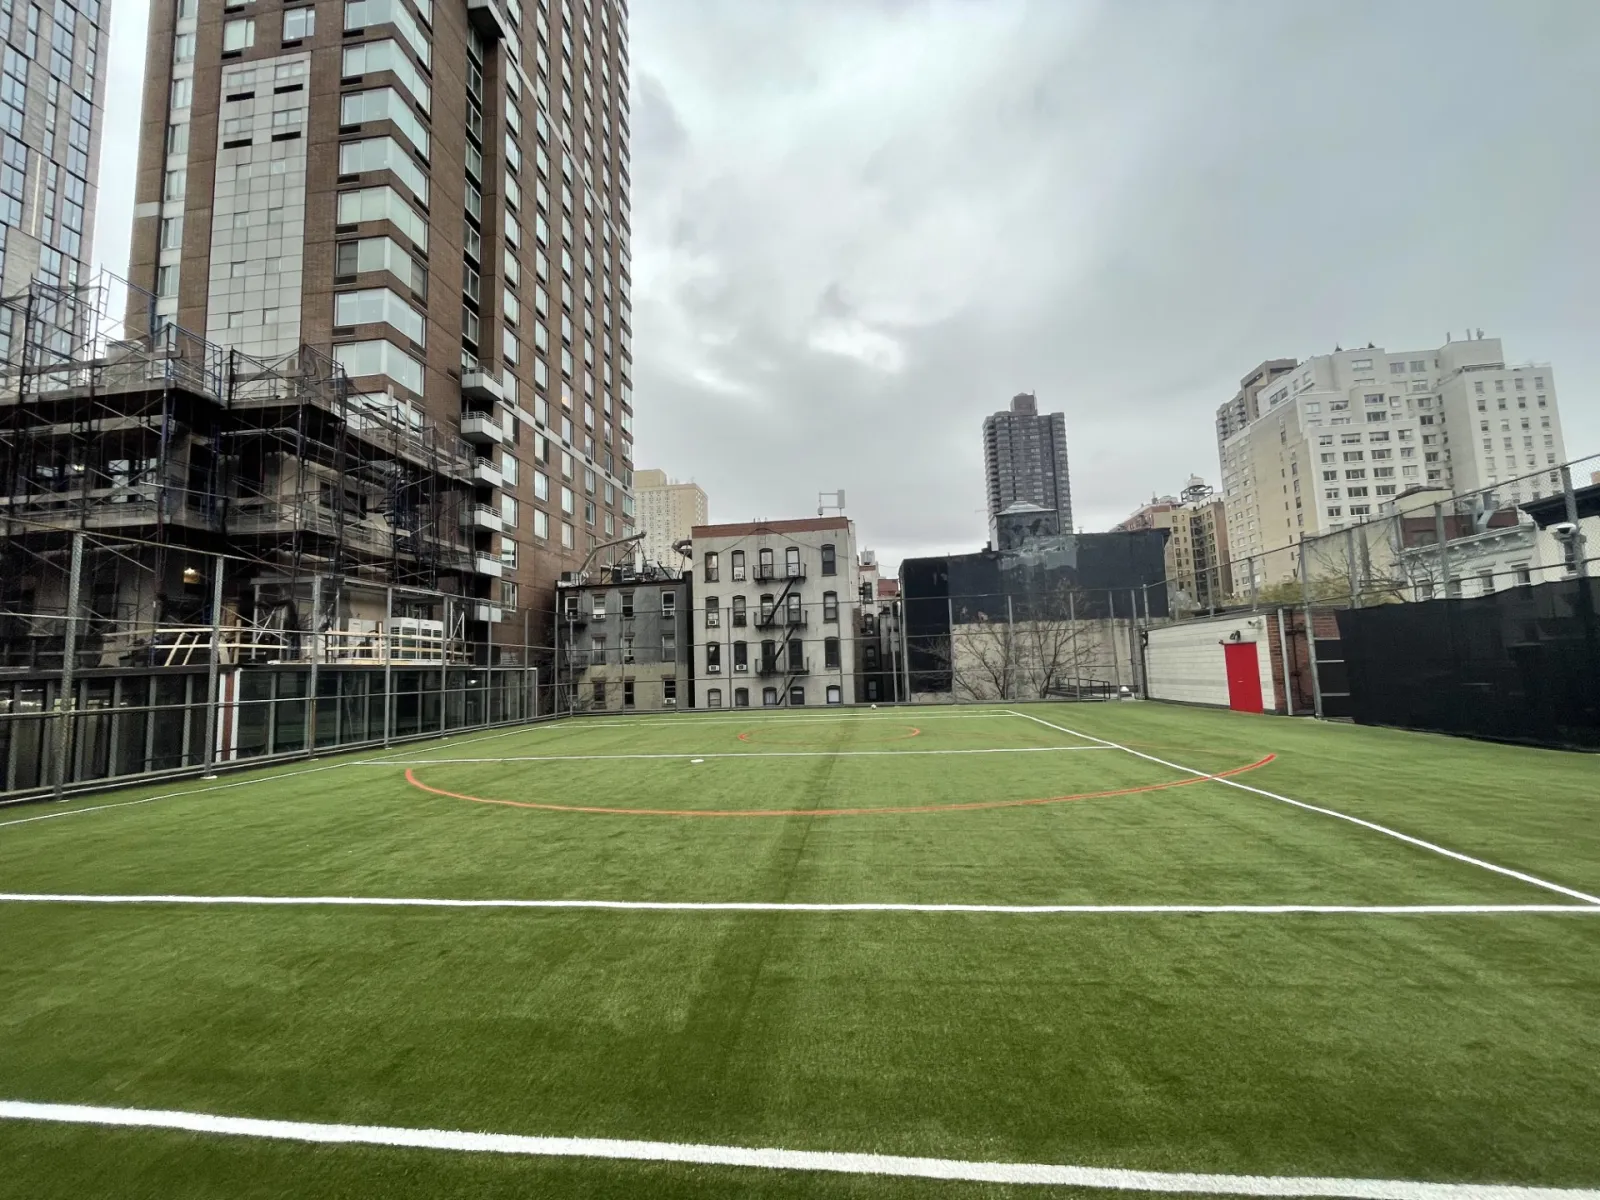 a football field with buildings in the background